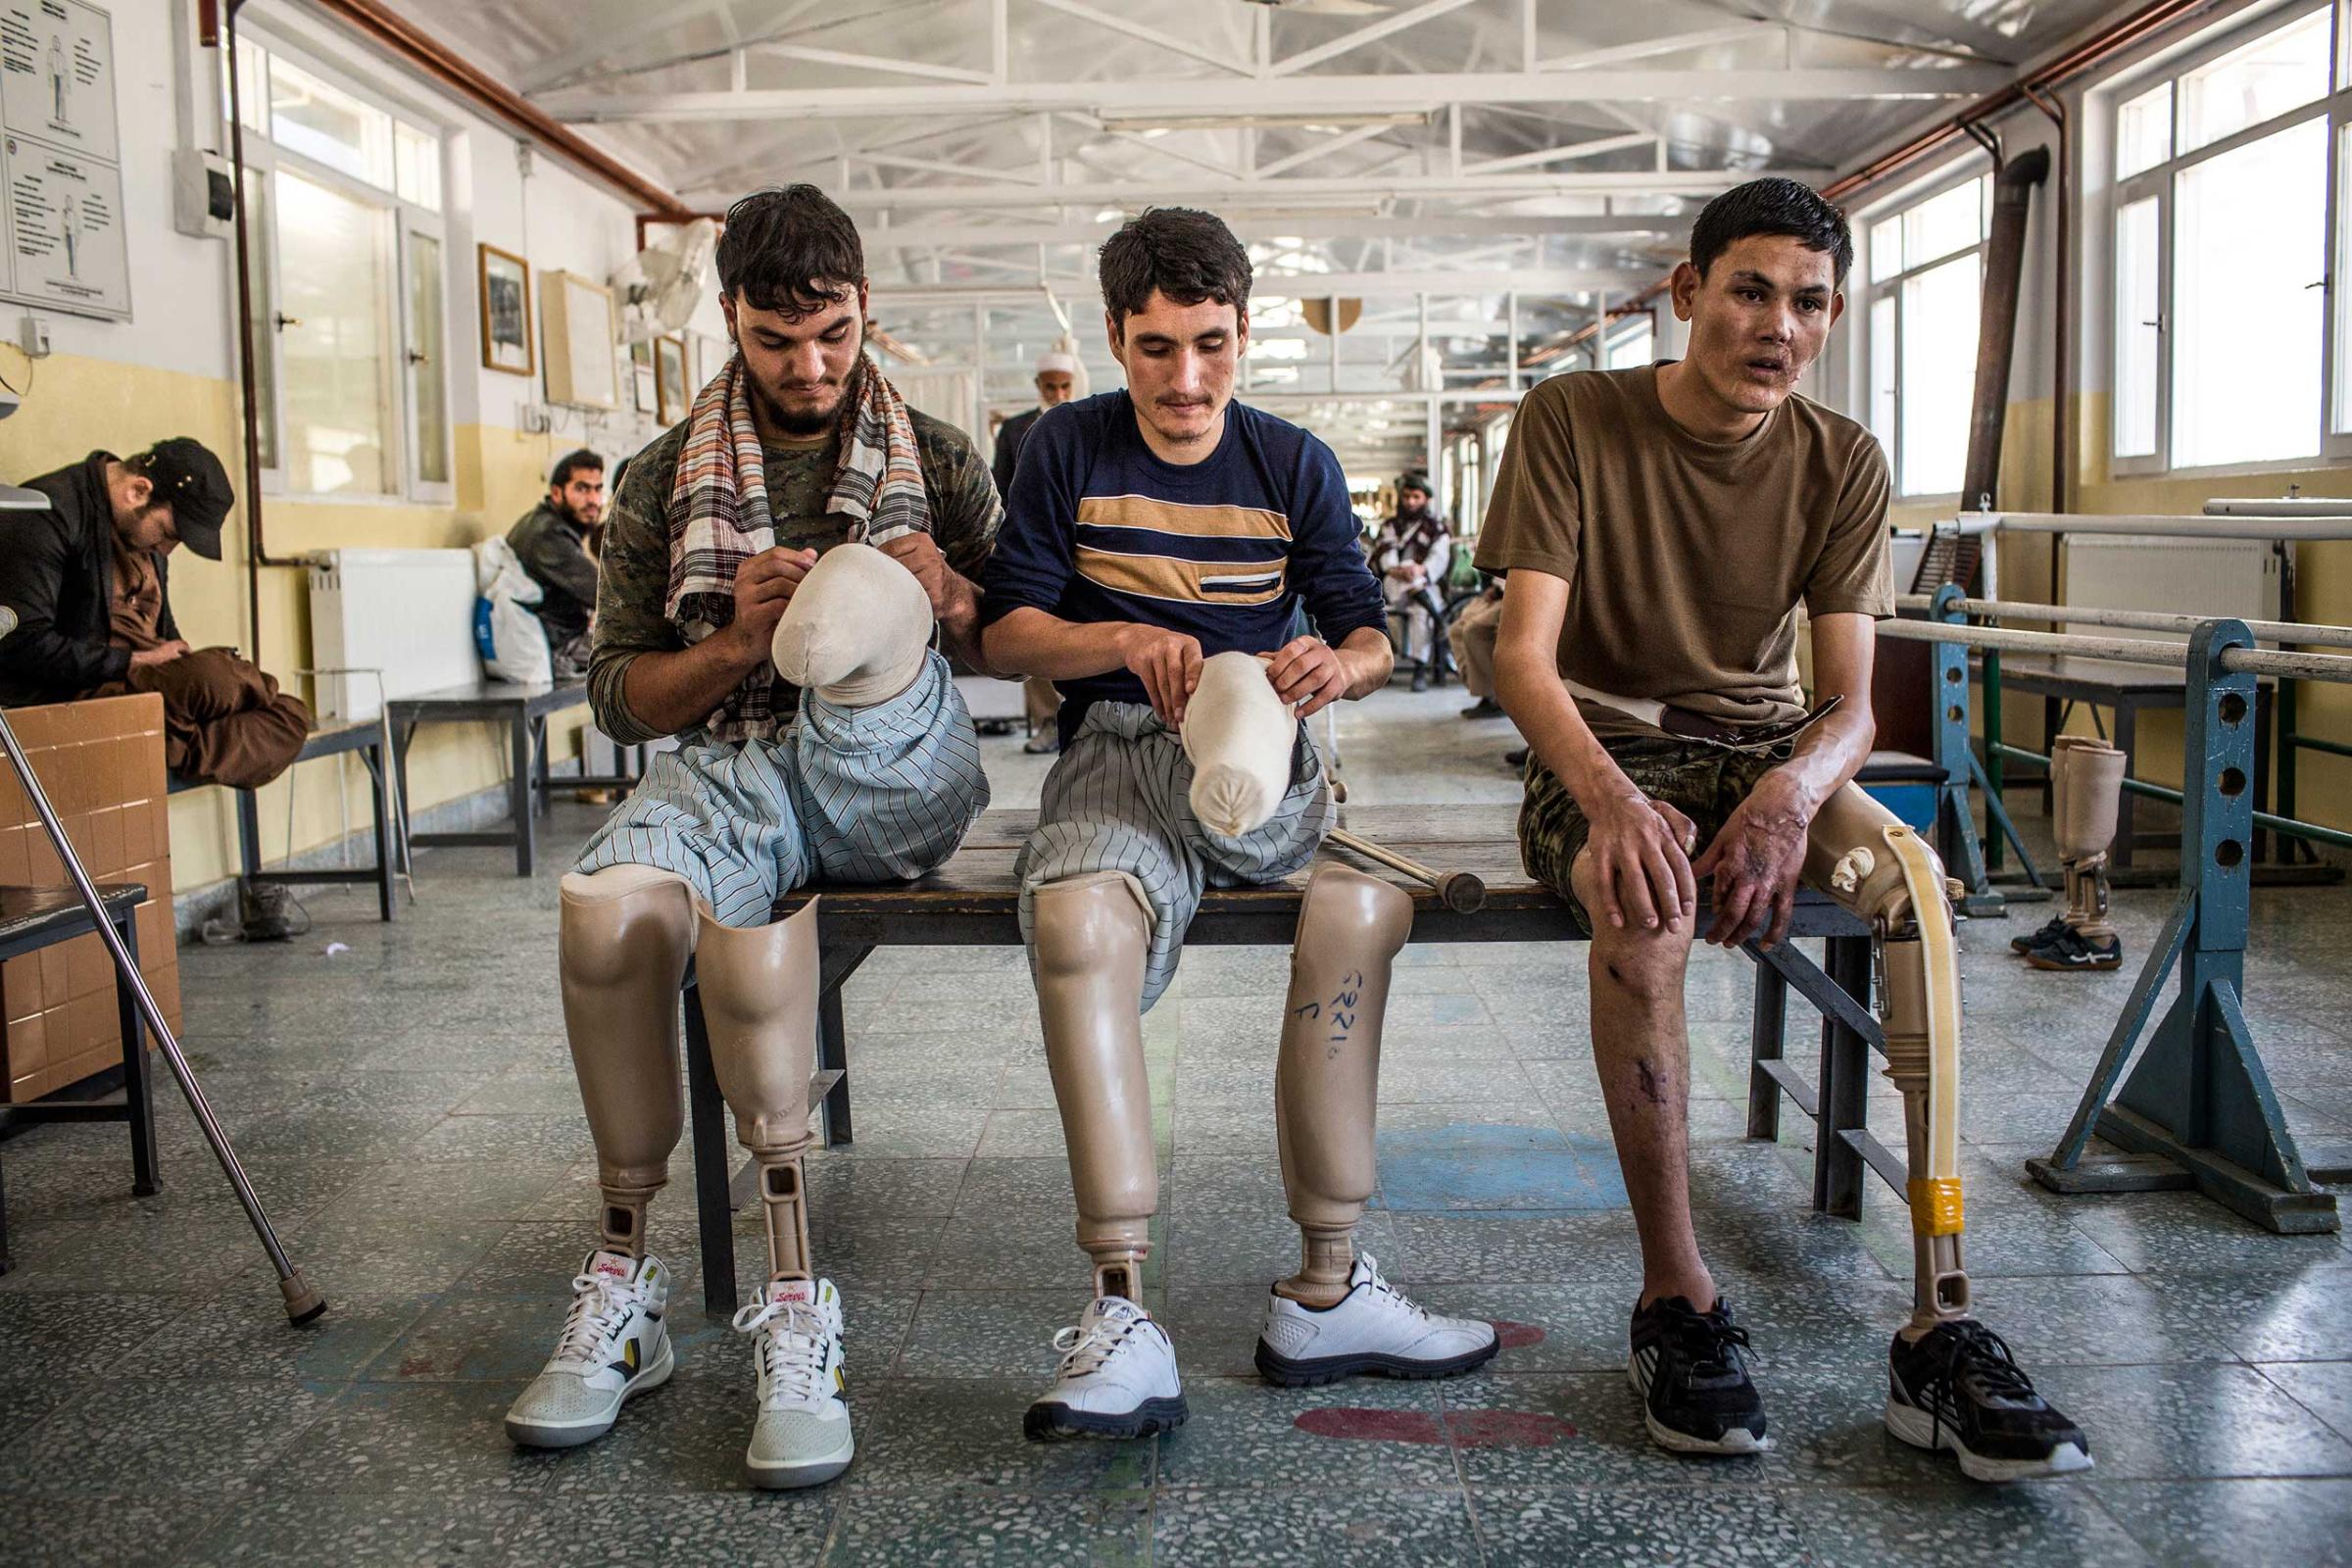 Rahimullah, Hamza and Islamudding, Afghan National Army soldiers who had injuries and amputations, adjust their prosthetics between physiotherapy sessions.